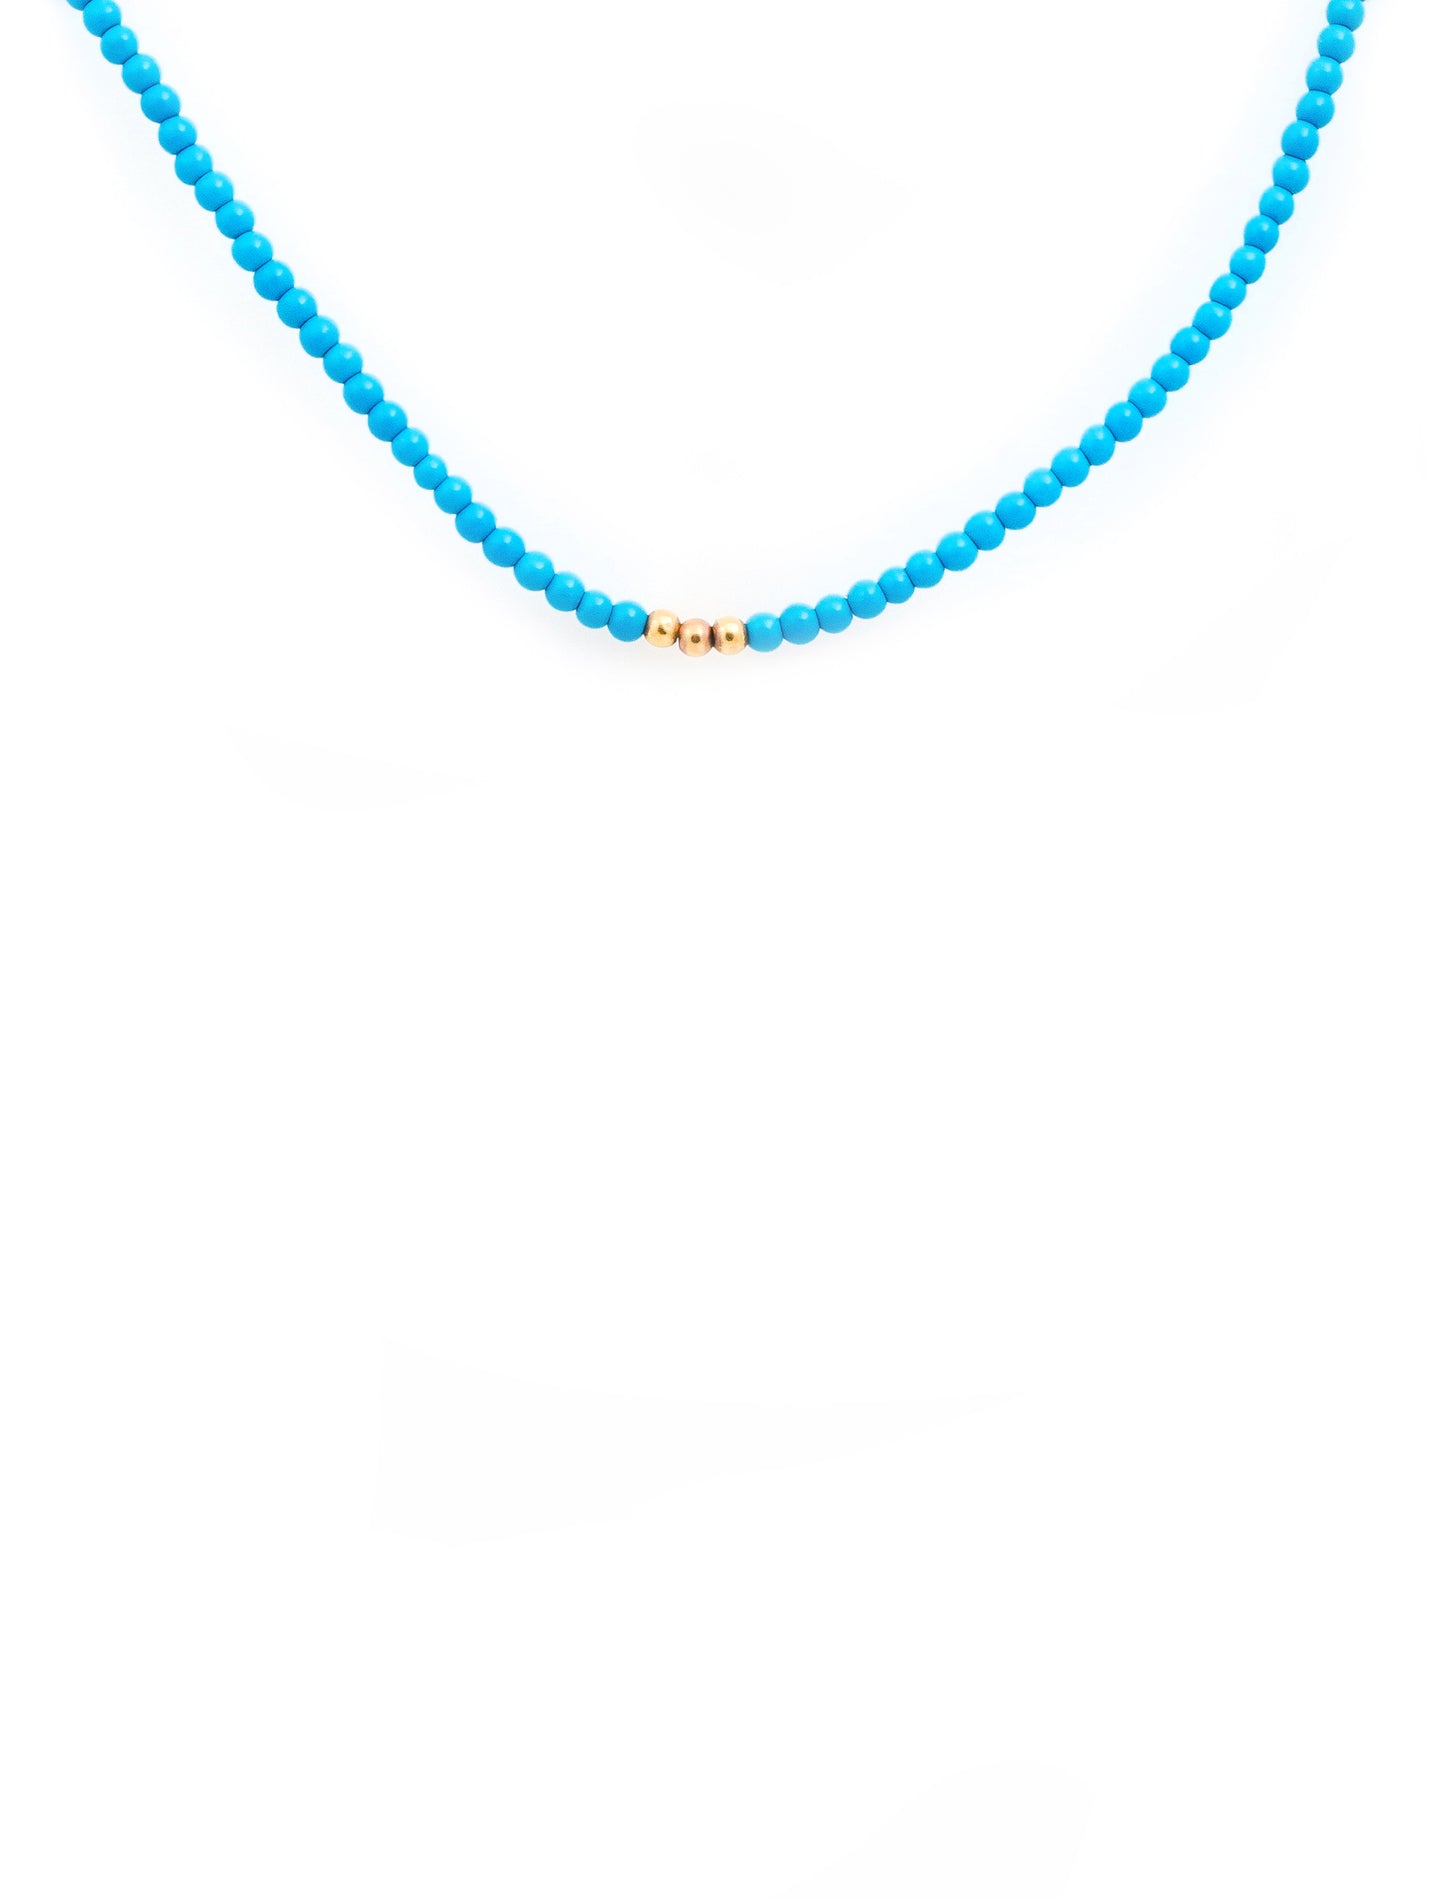 Short Turquoise Bead Necklace